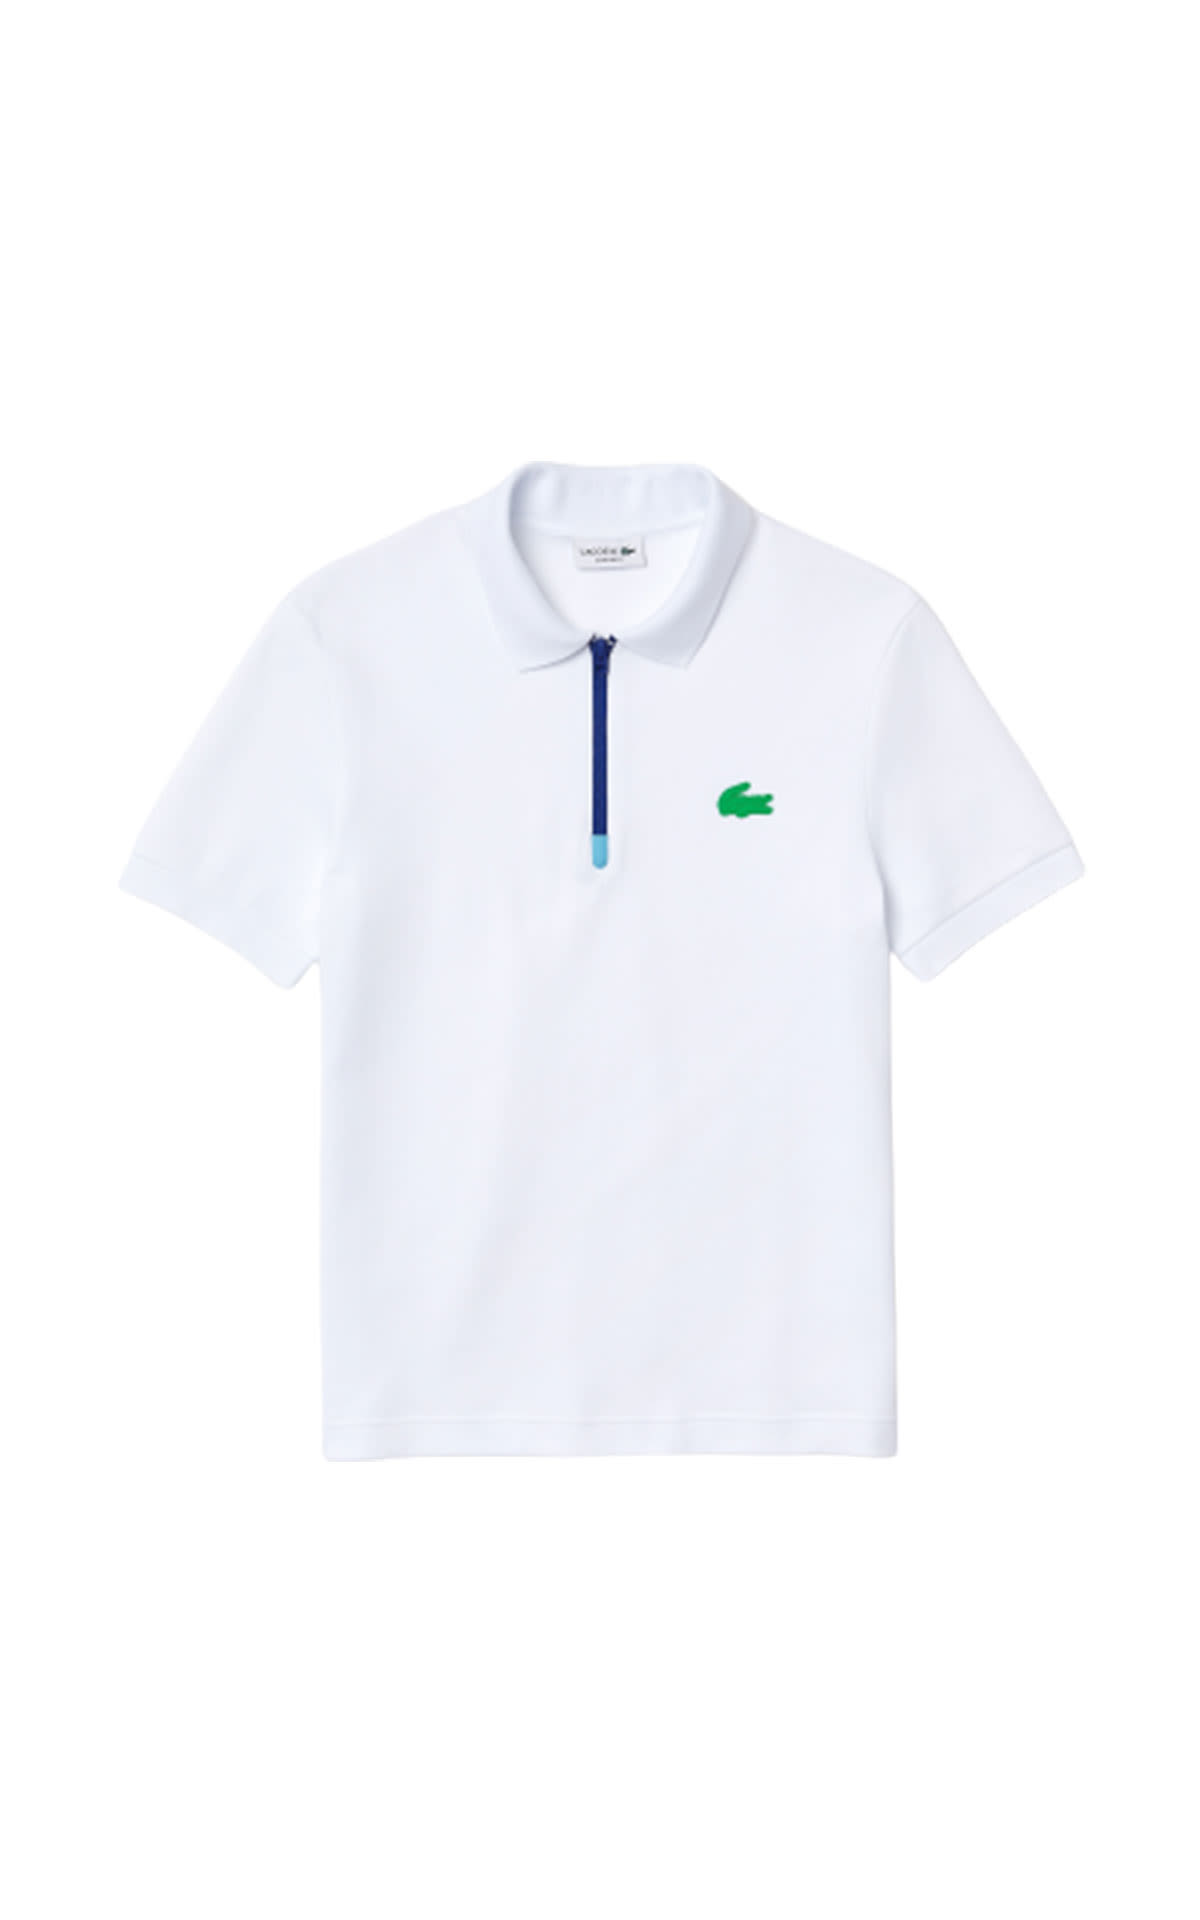 Lacoste Polo shirt from Bicester Village